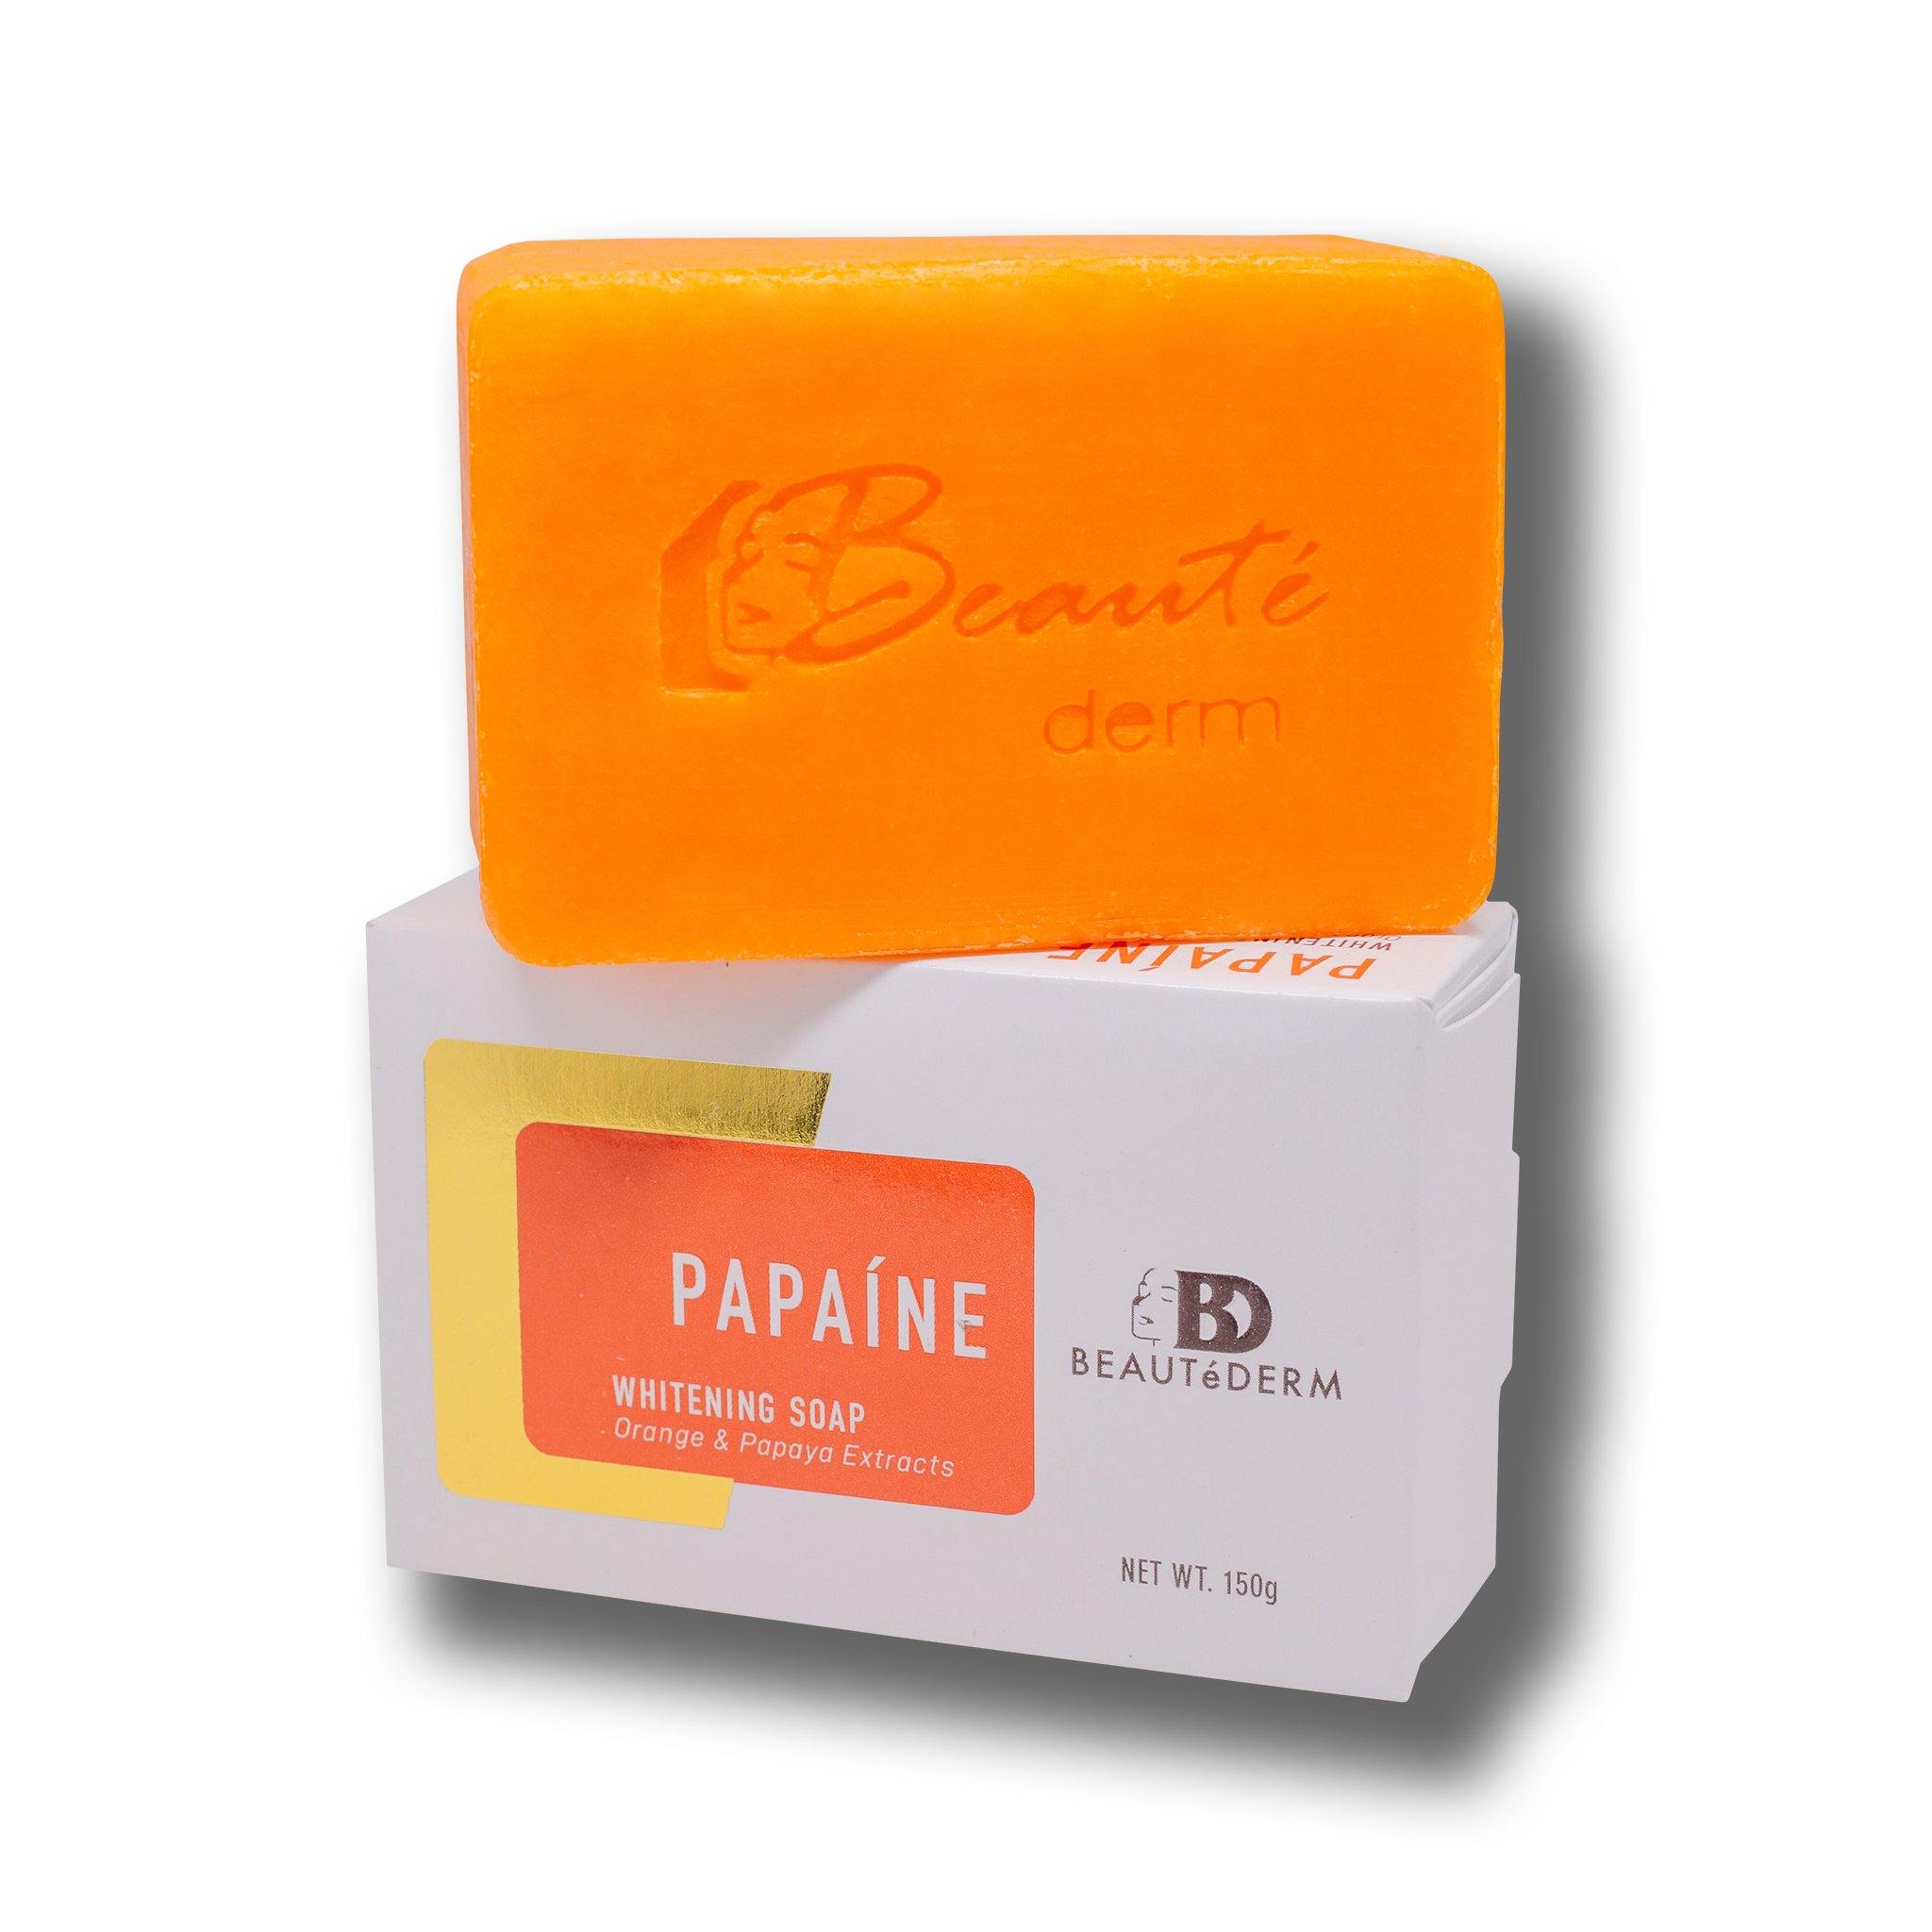 Papaine Whitening Soap, with Orange & Papay Extracts, 150g, by Beautederm